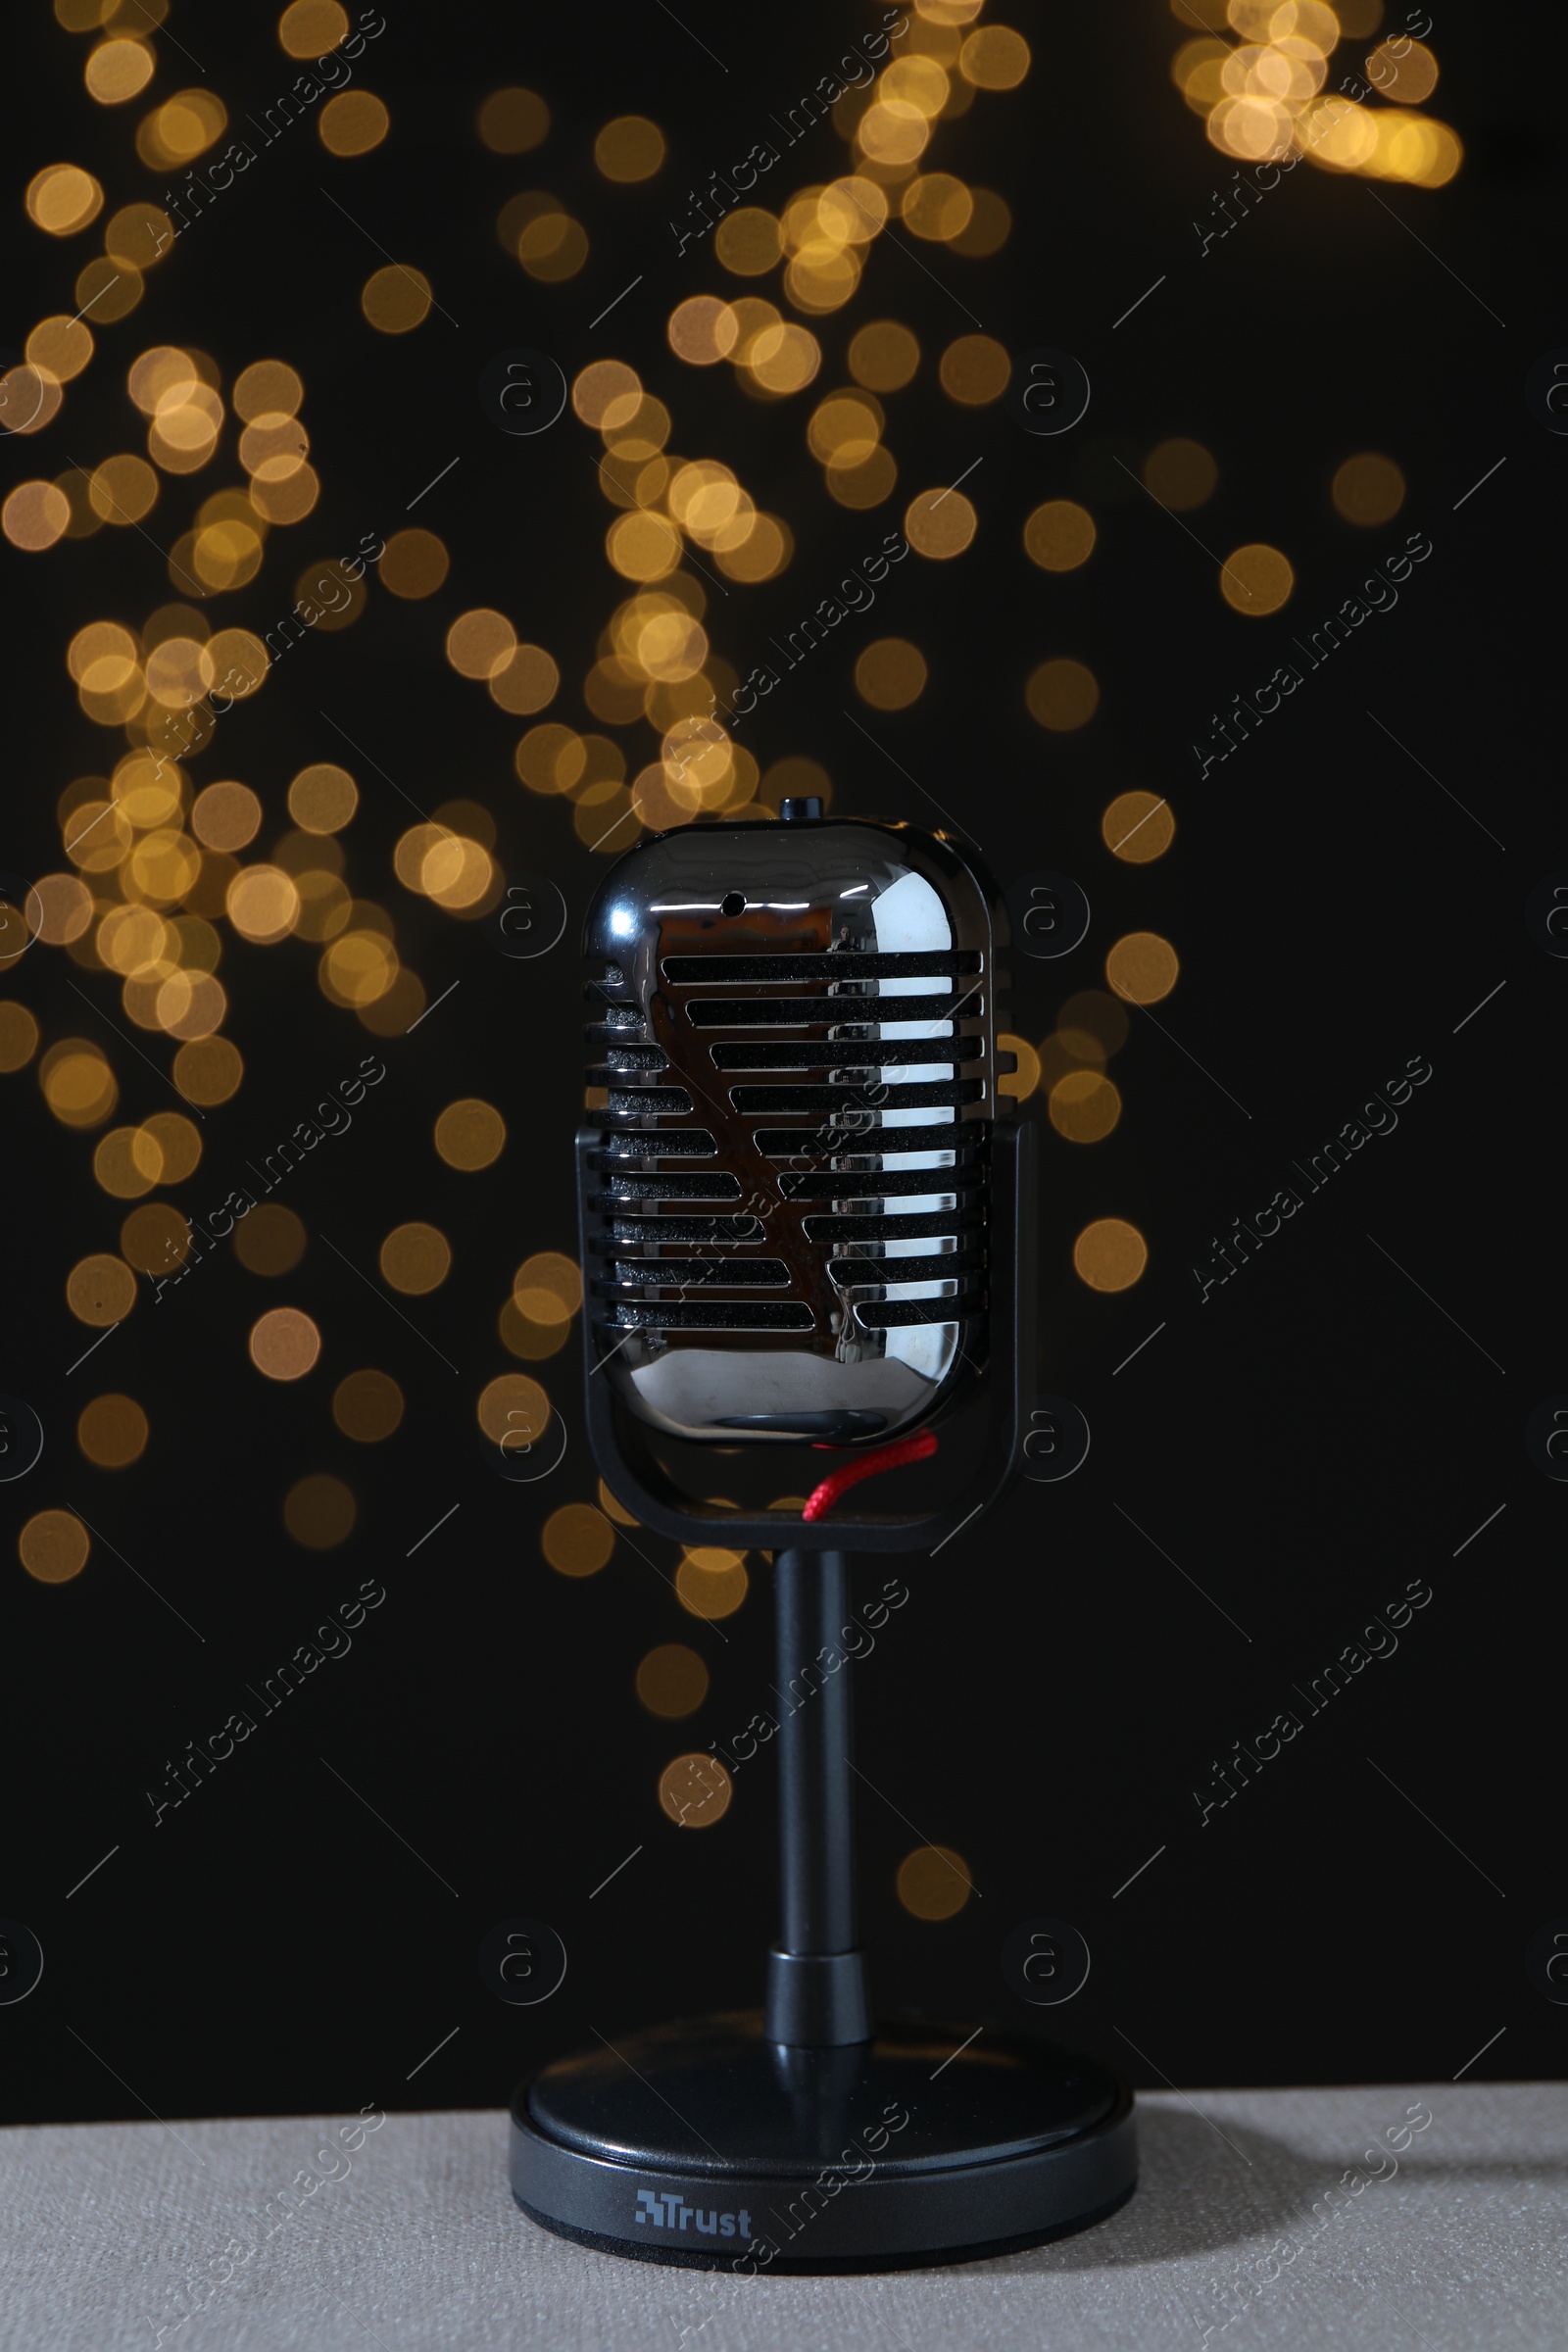 Photo of Vintage microphone on table against black background with blurred lights. Sound recording and reinforcement